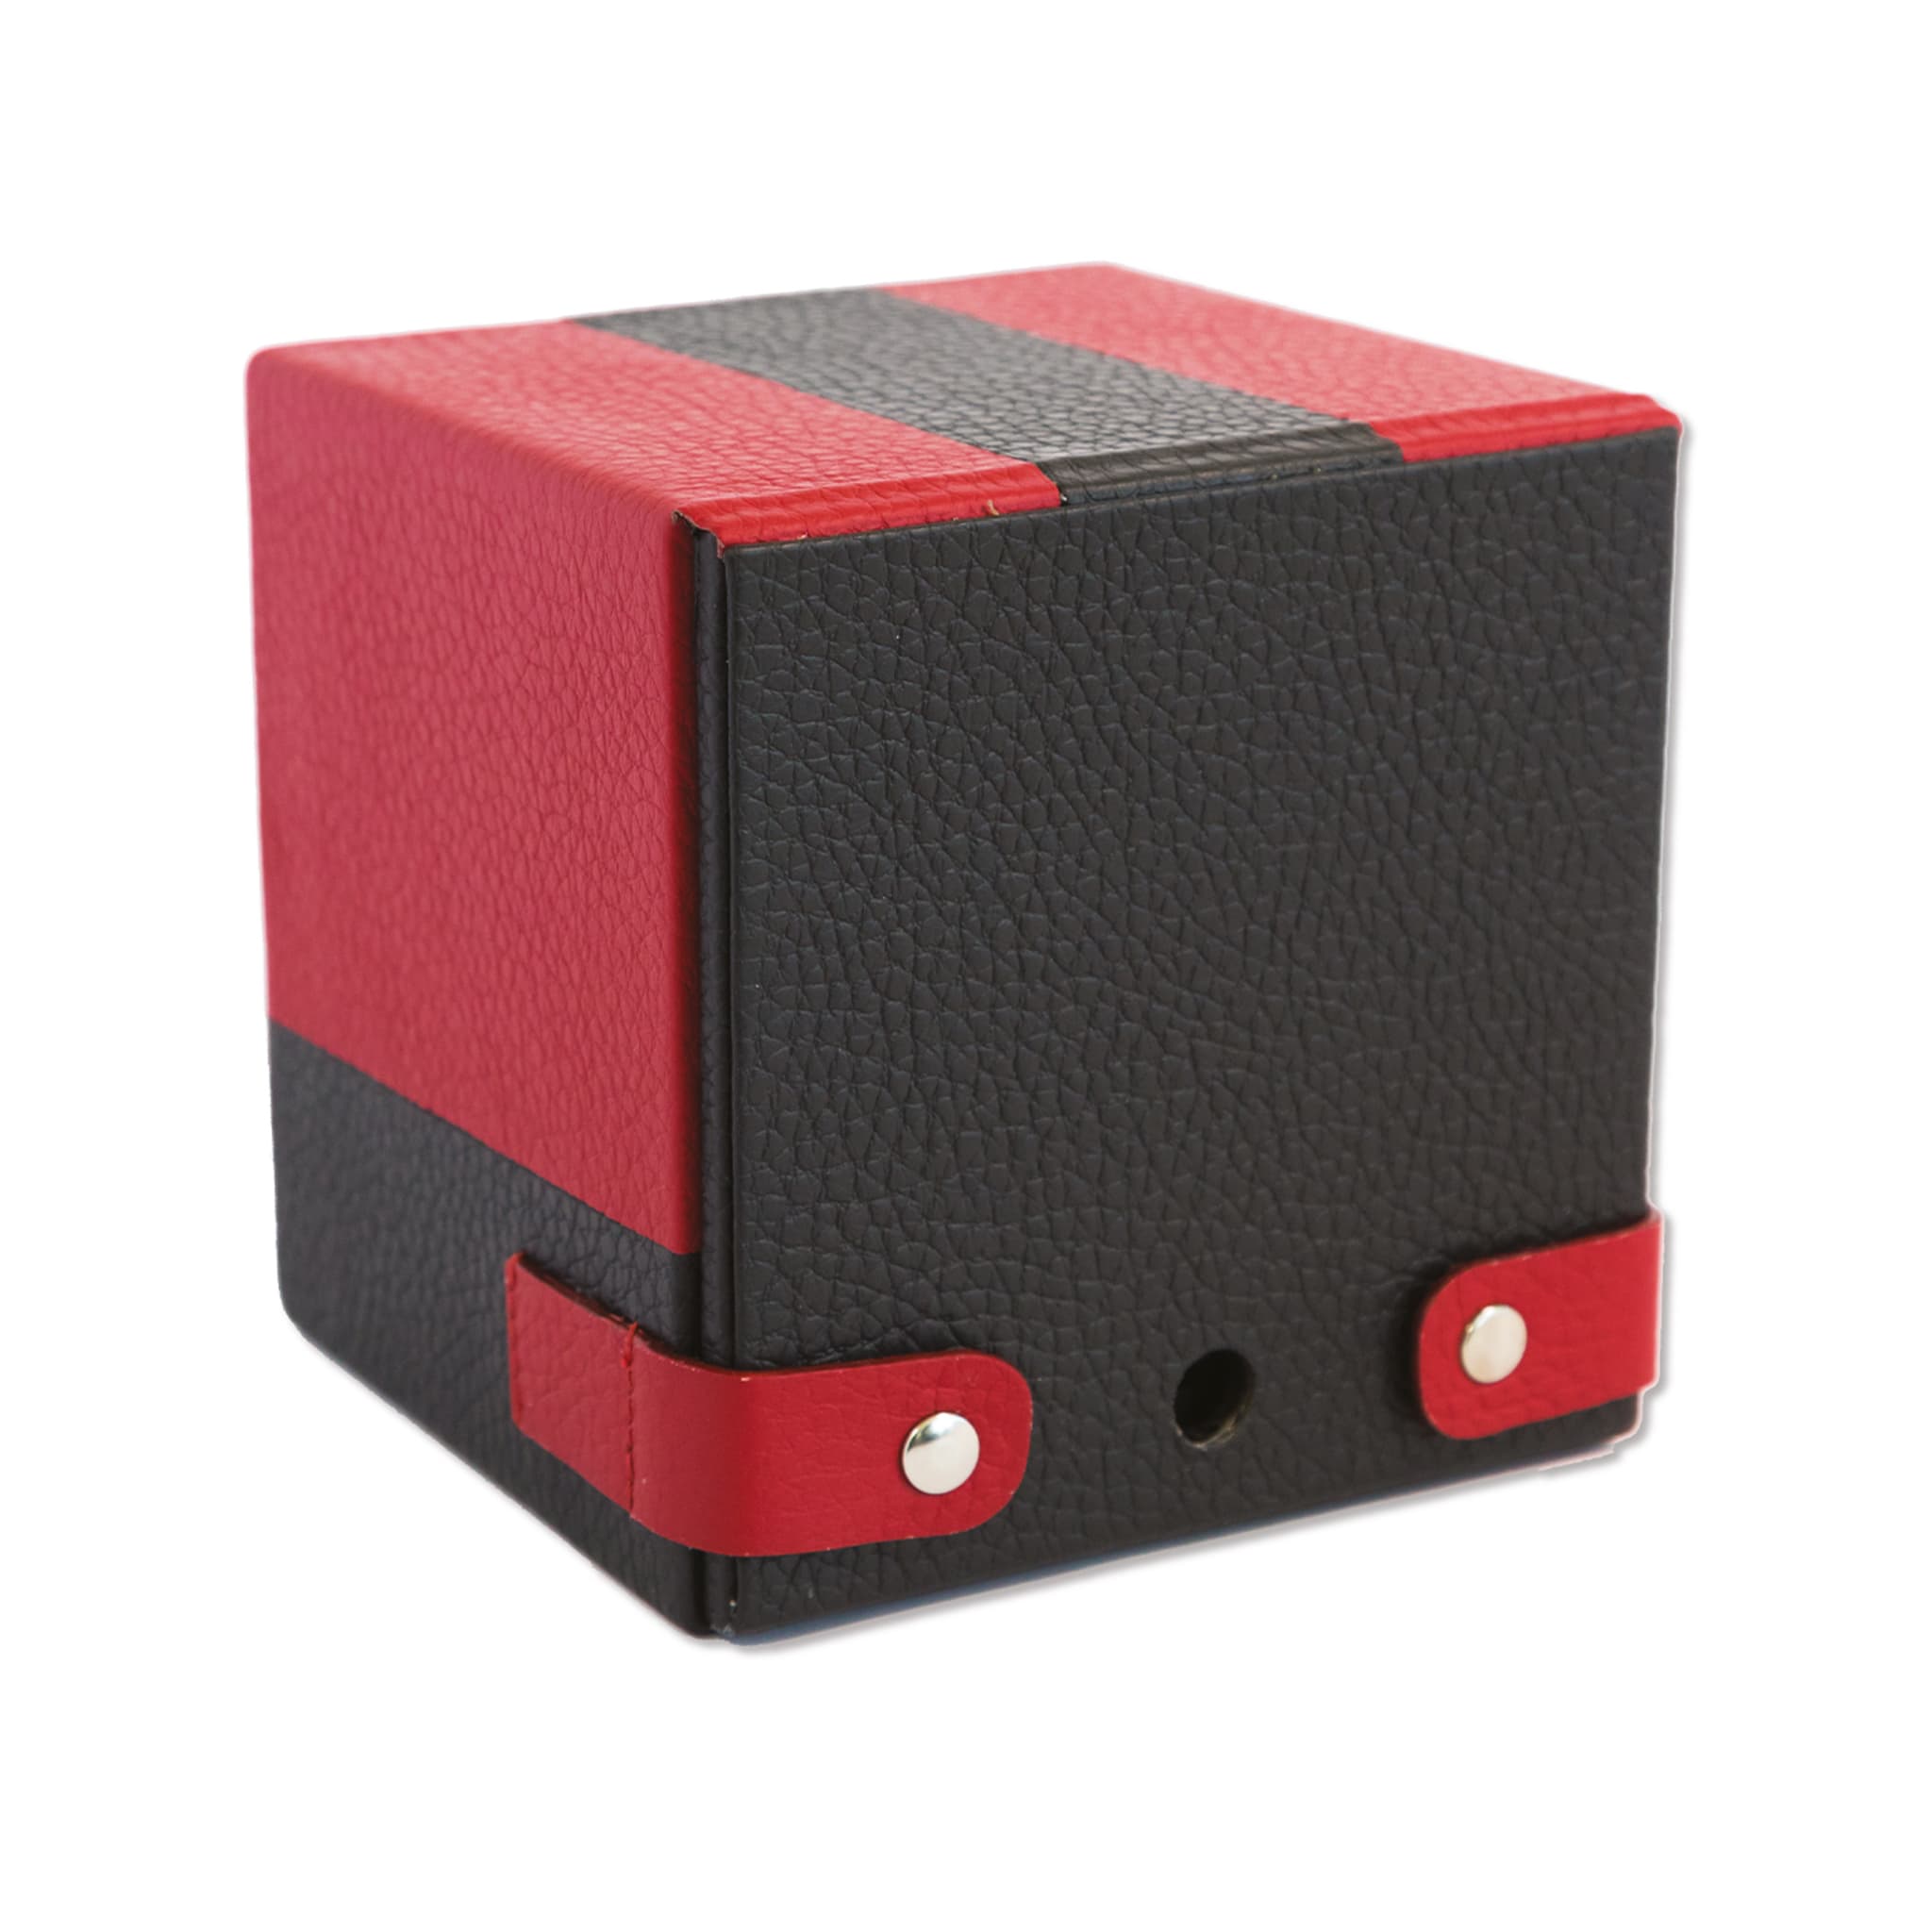 Pillow Red and Black Watch Winder - Alternative view 1